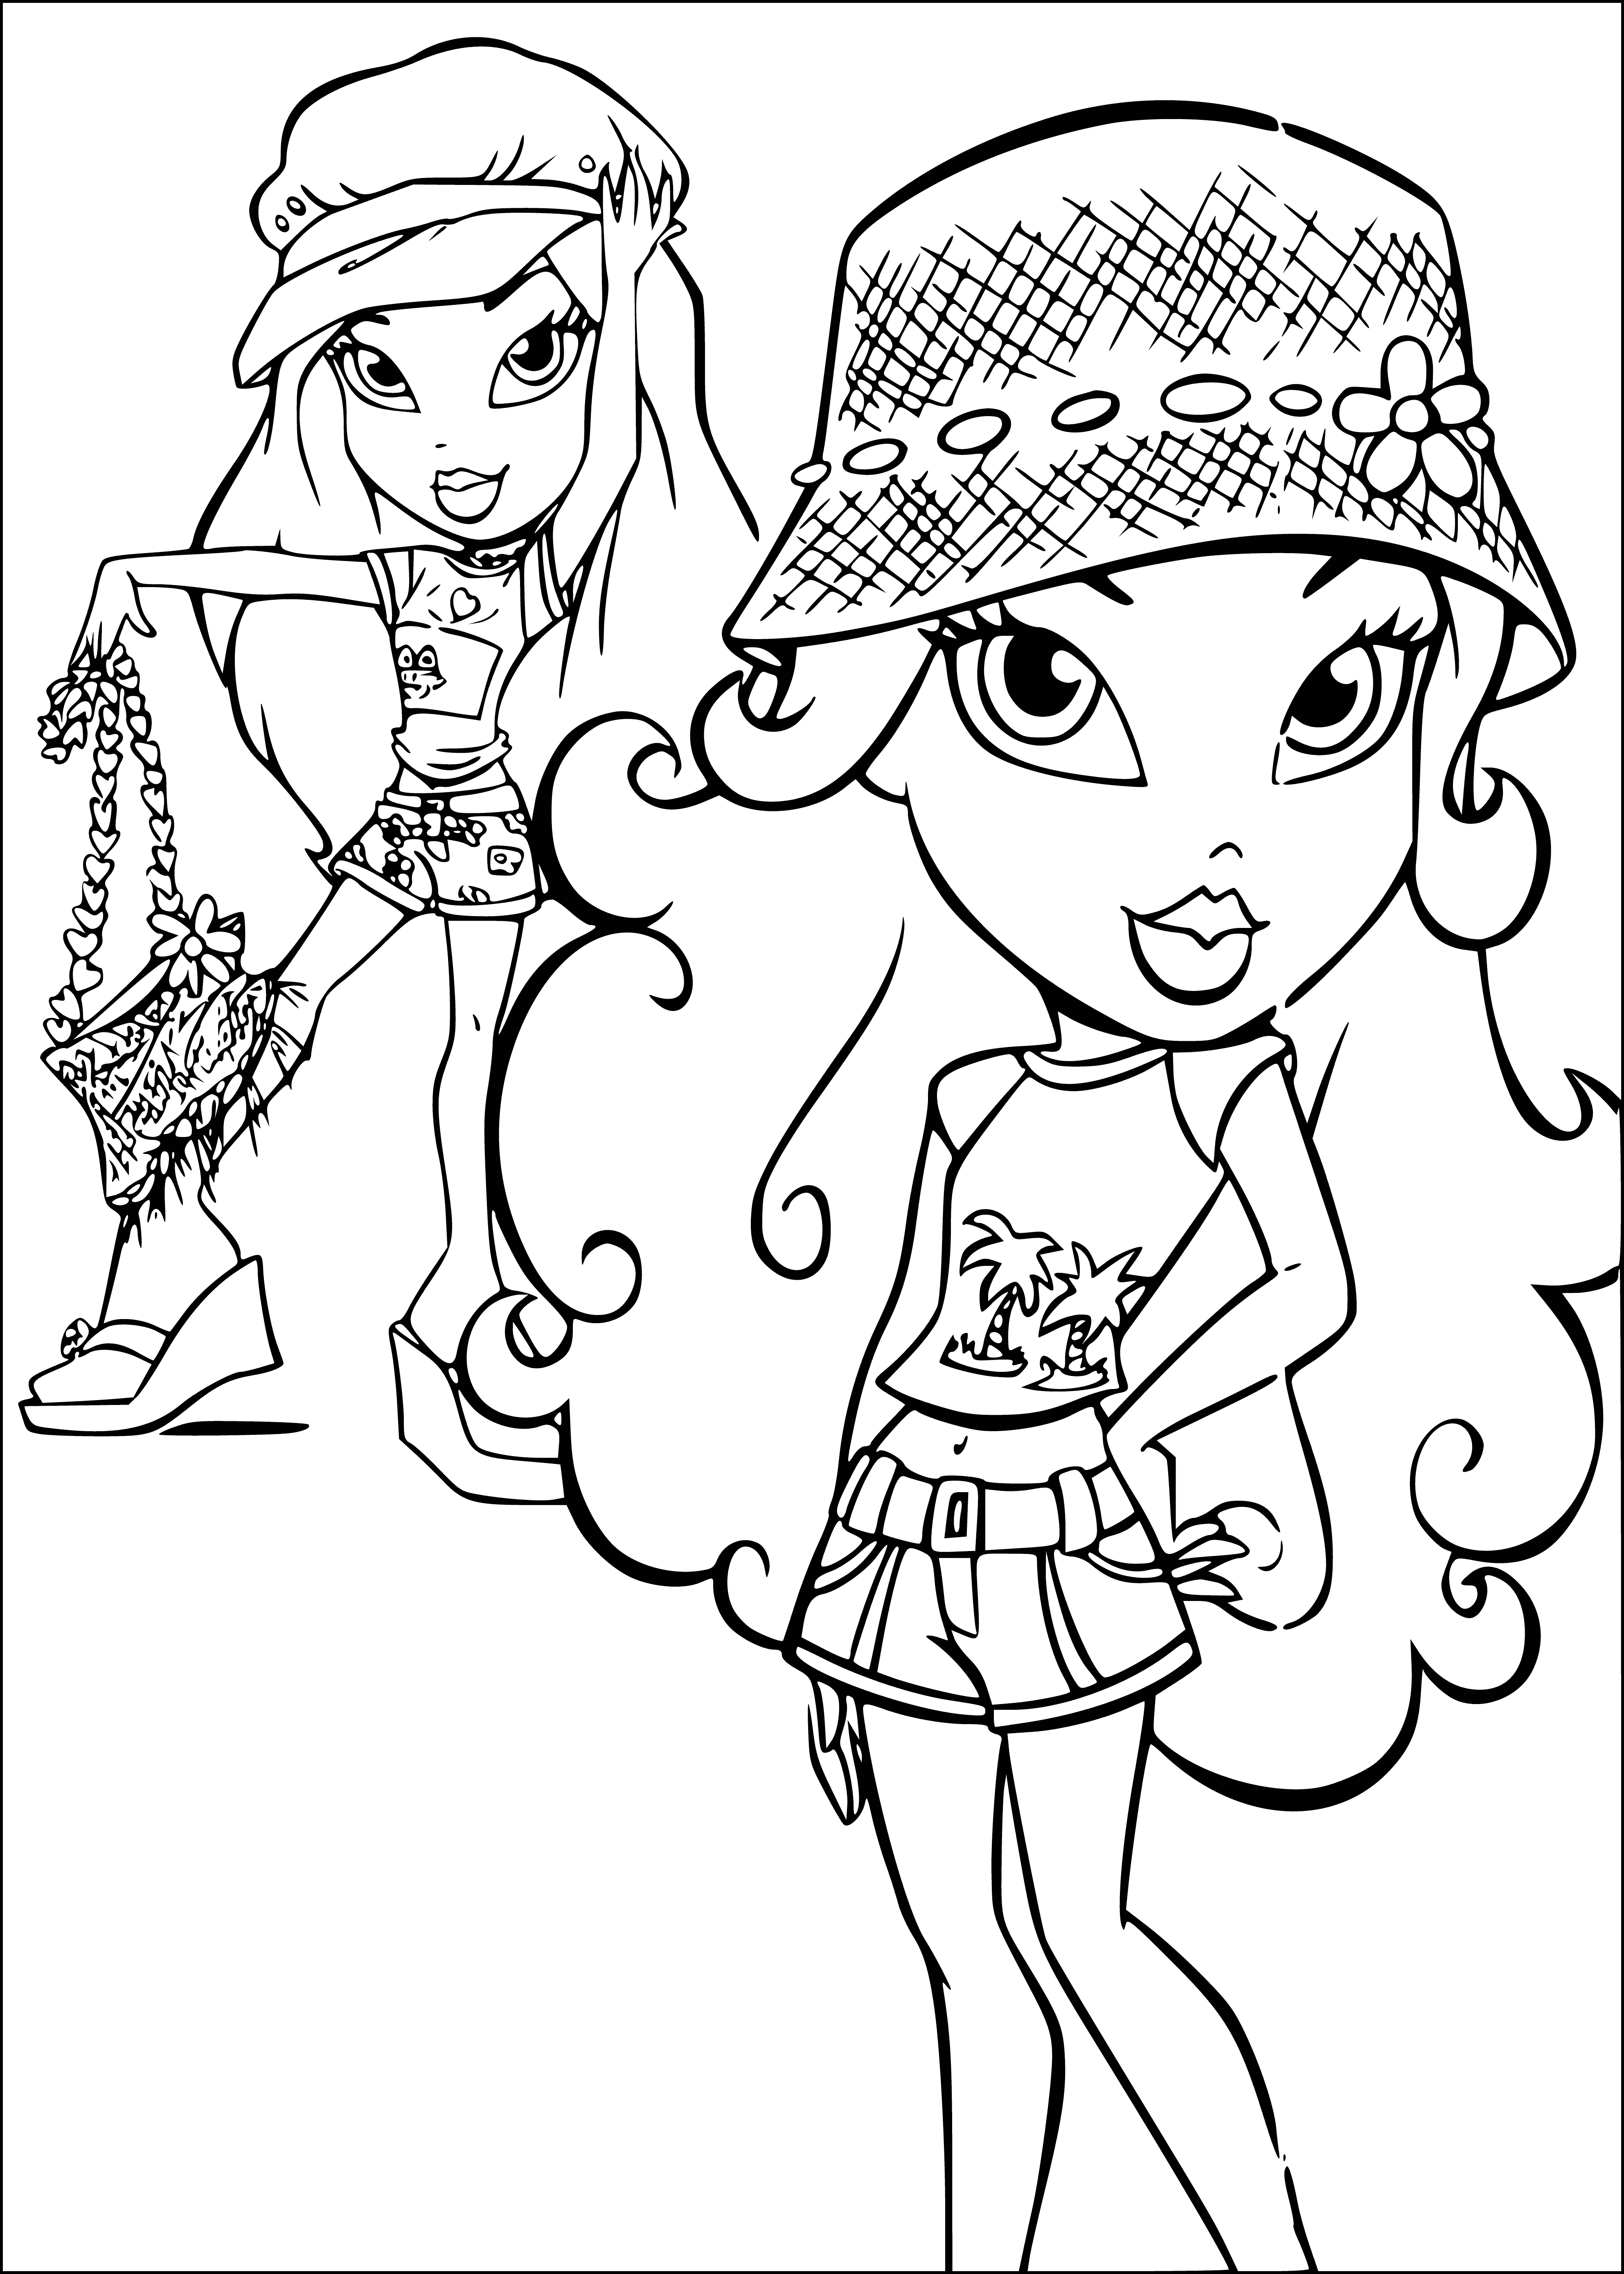 coloring page: Four dolls of different colors, wearing various clothes and shoes. One pink, one purple, one blue, one green. All with big eyes and heads.